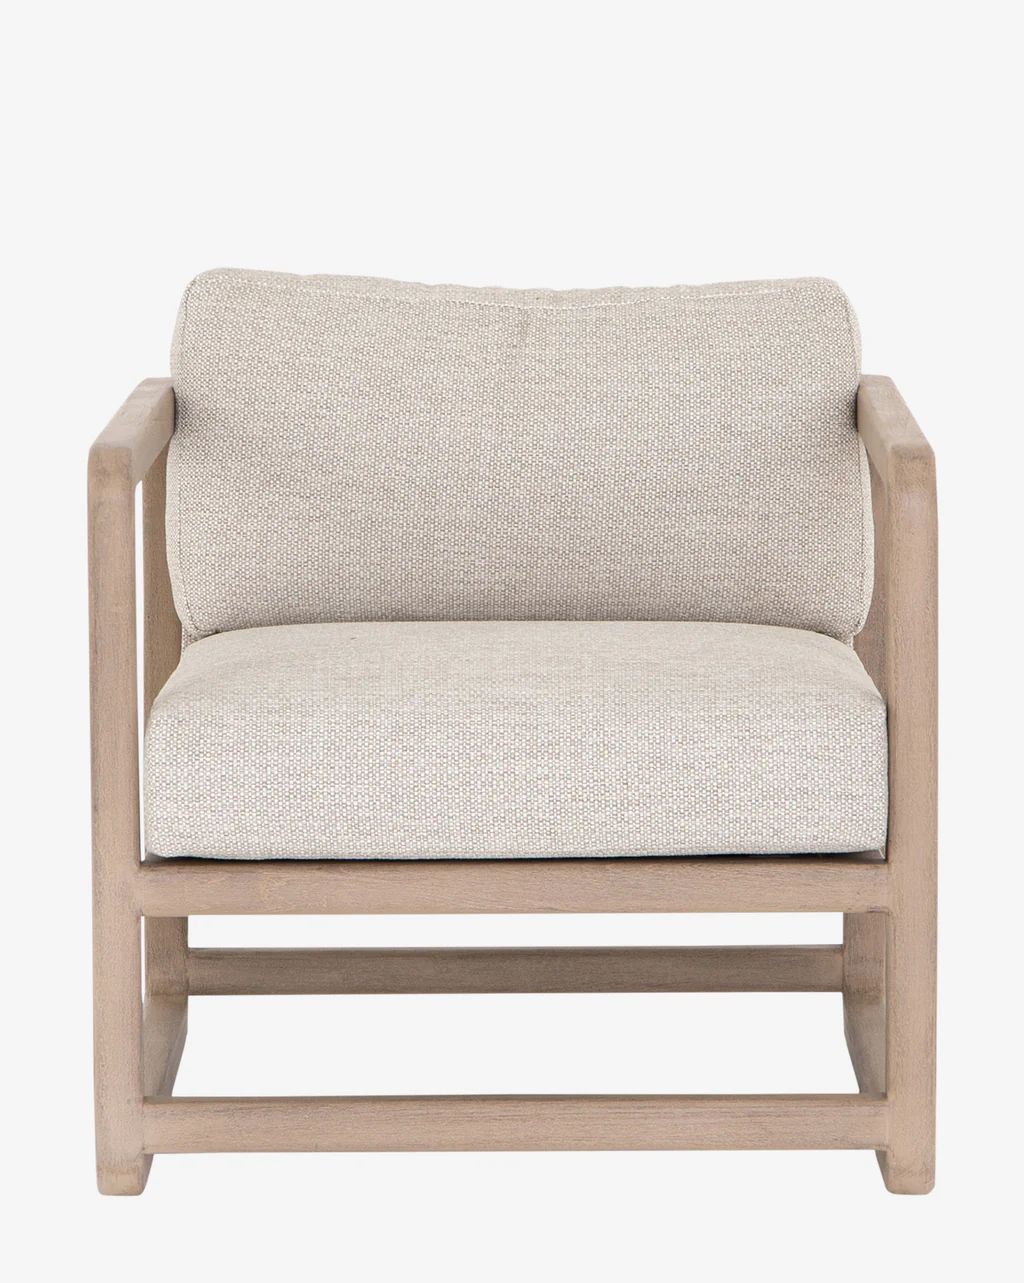 Wembley Outdoor Lounge Chair | McGee & Co.